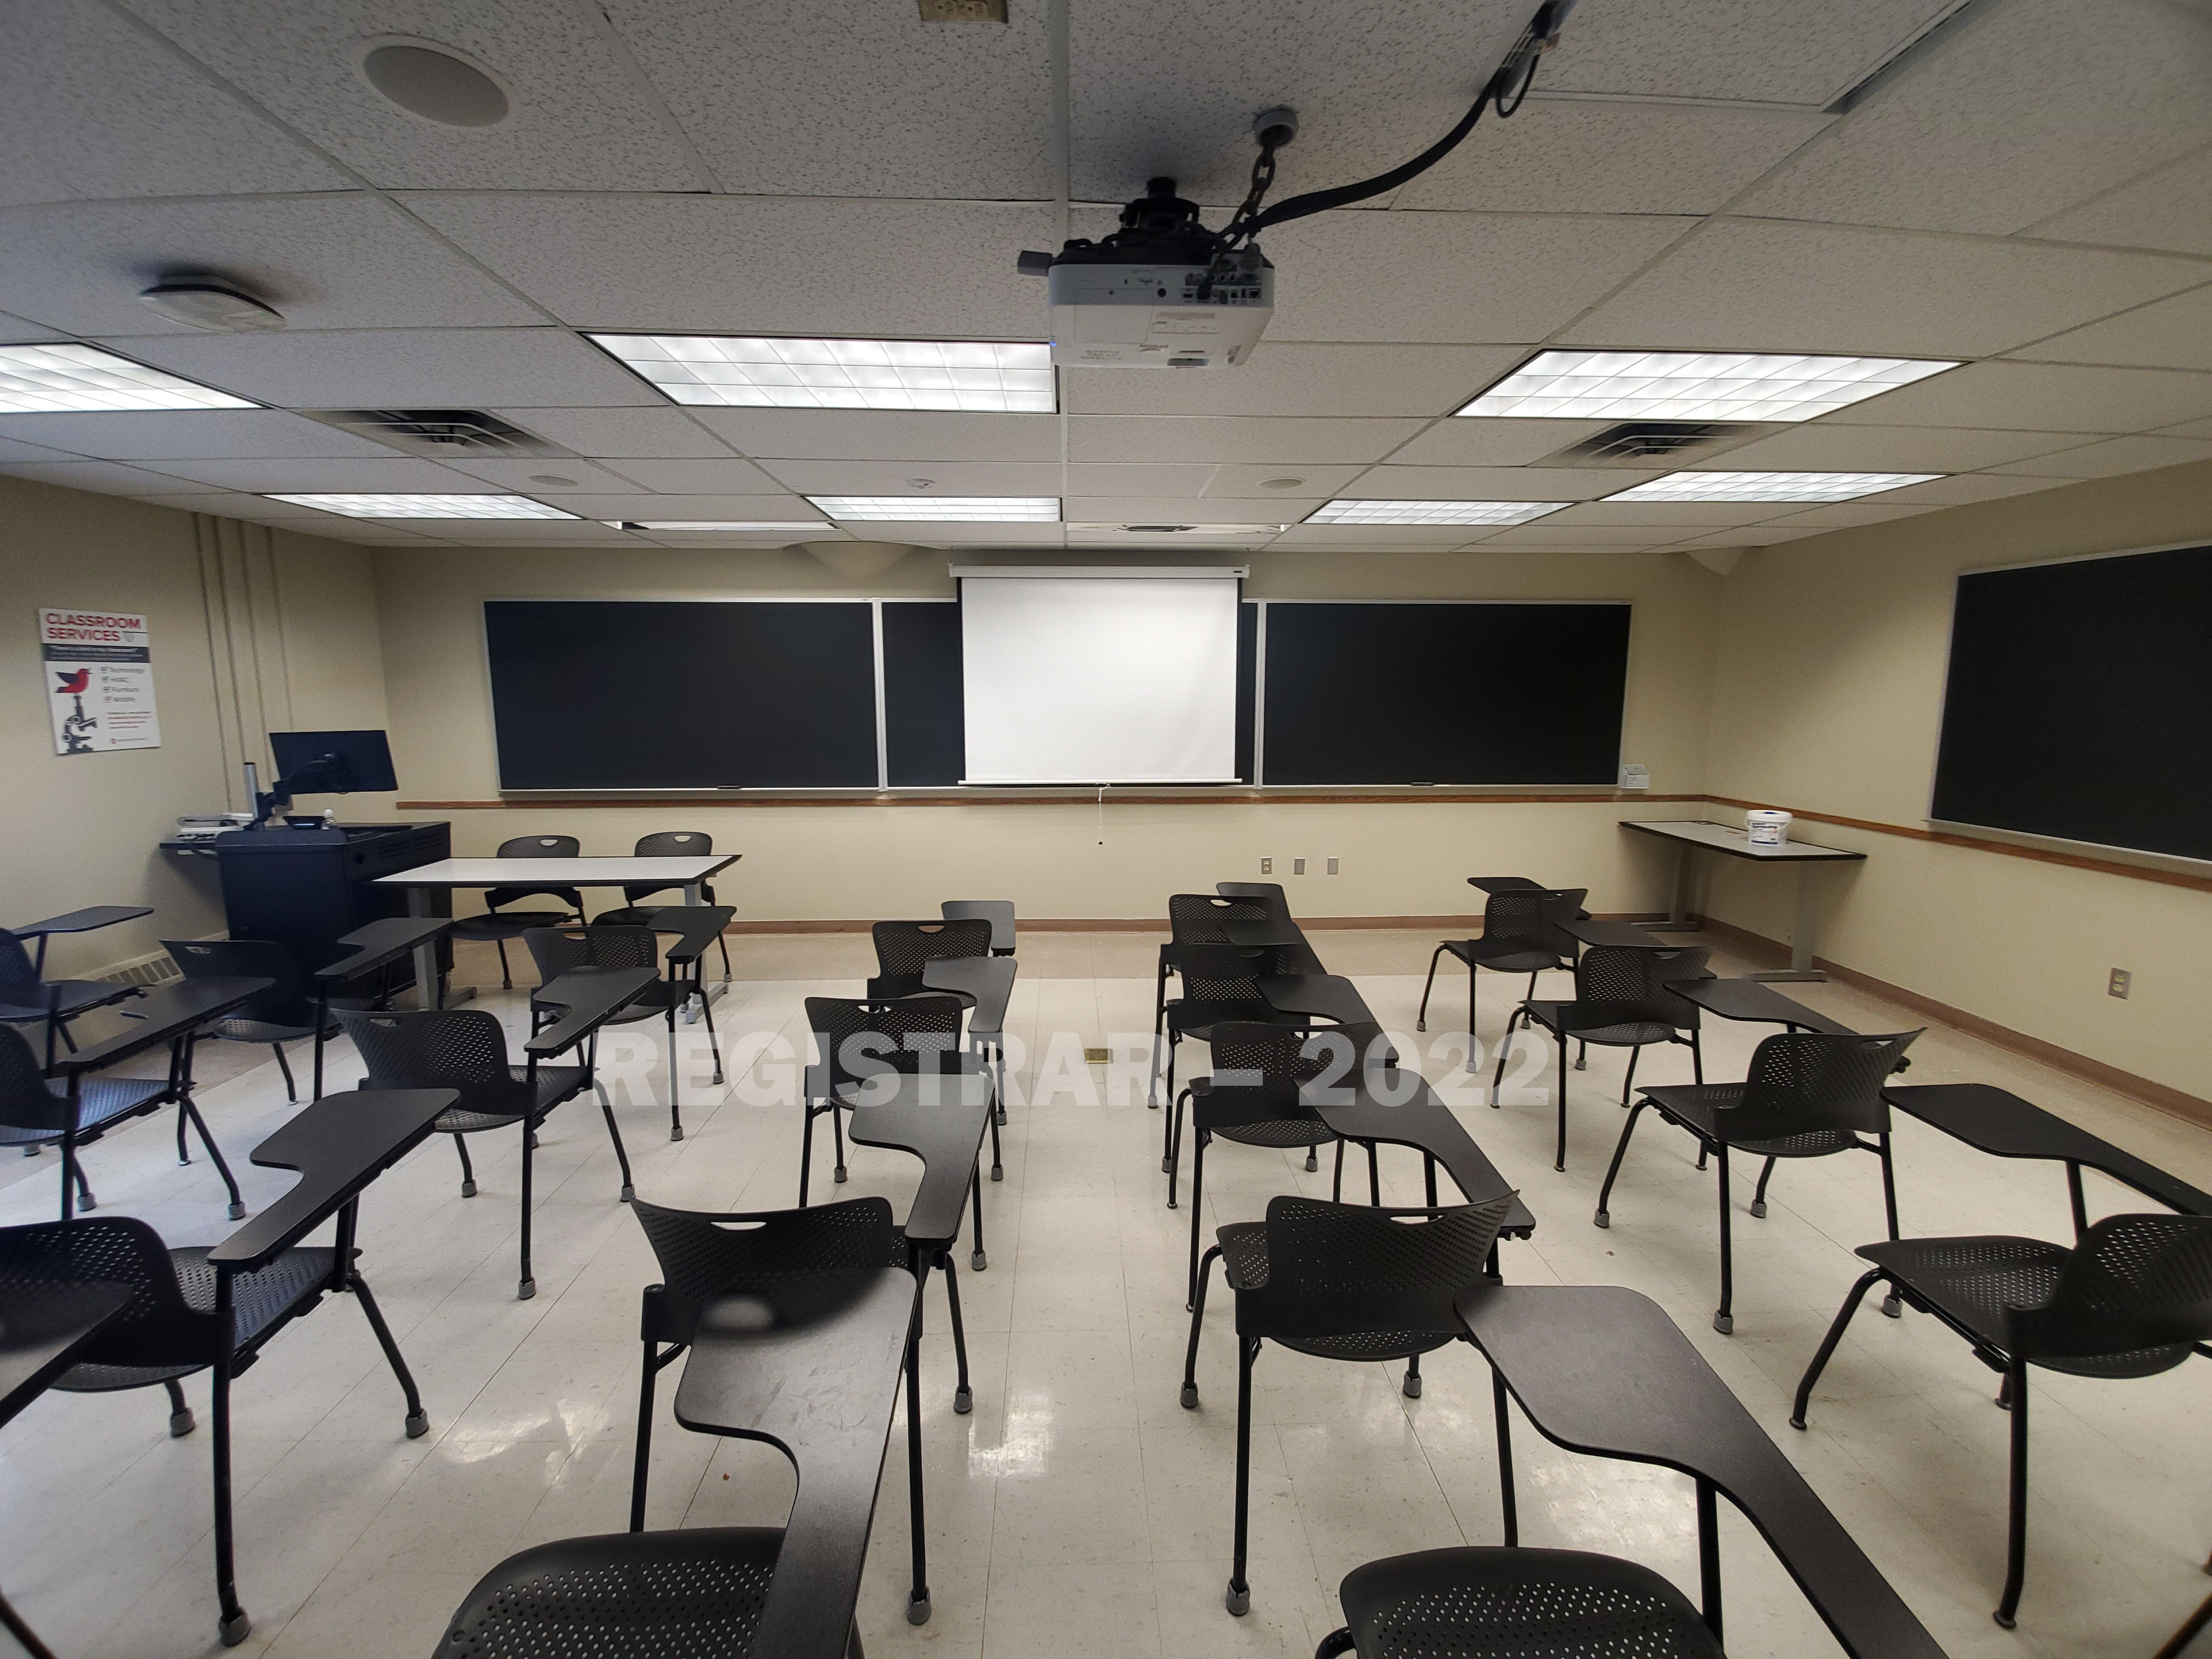 Enarson Classroom Building room 258 ultra wide angle view from the back of the room with projector screen down